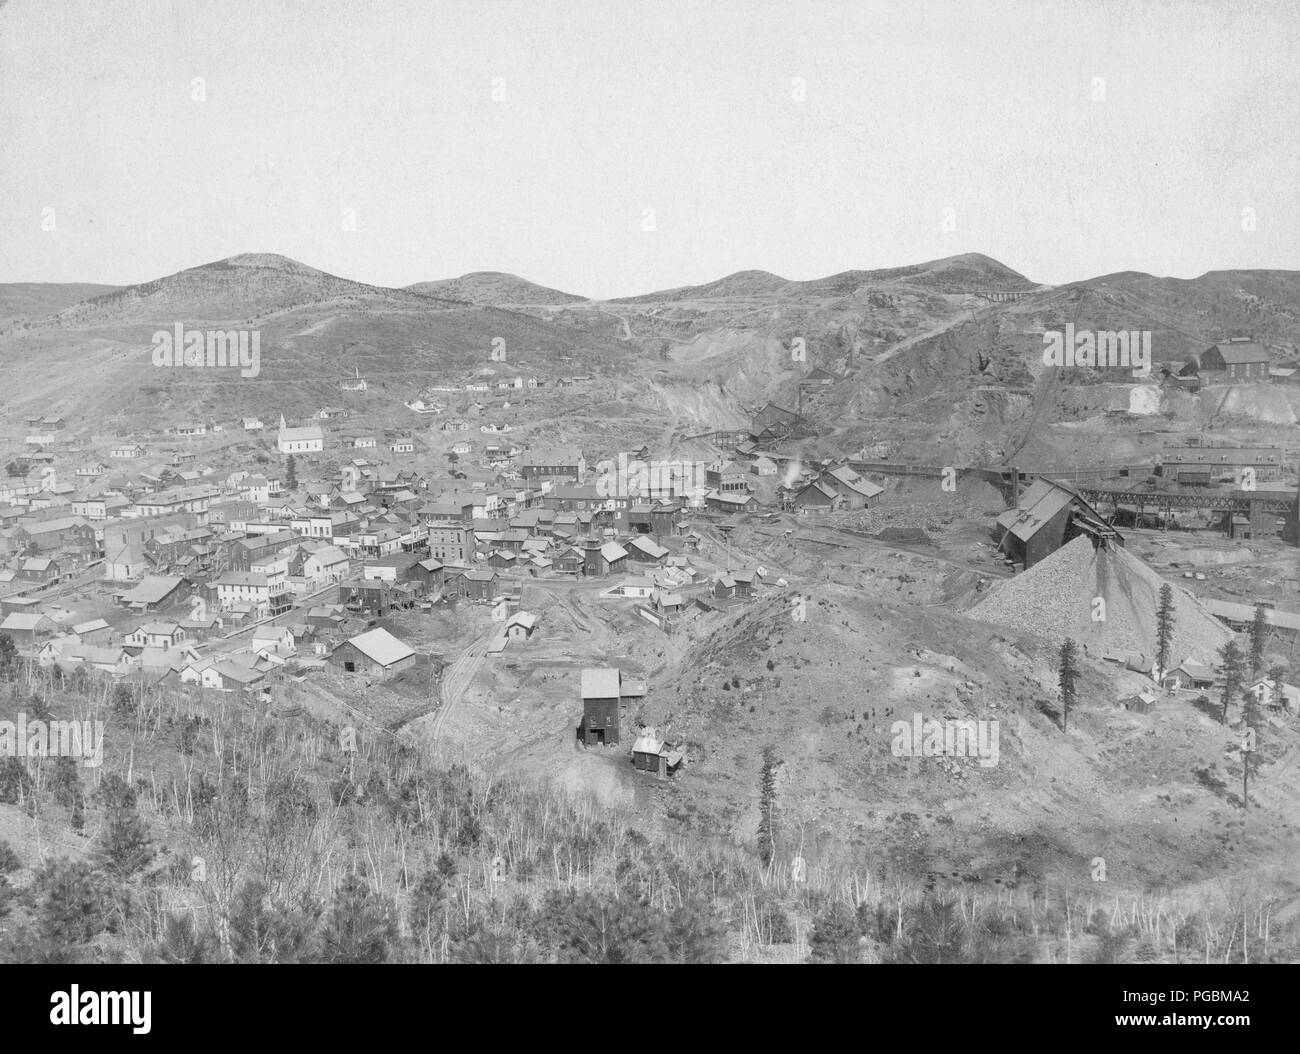 Distant view of mining town; hills in background. Stock Photo